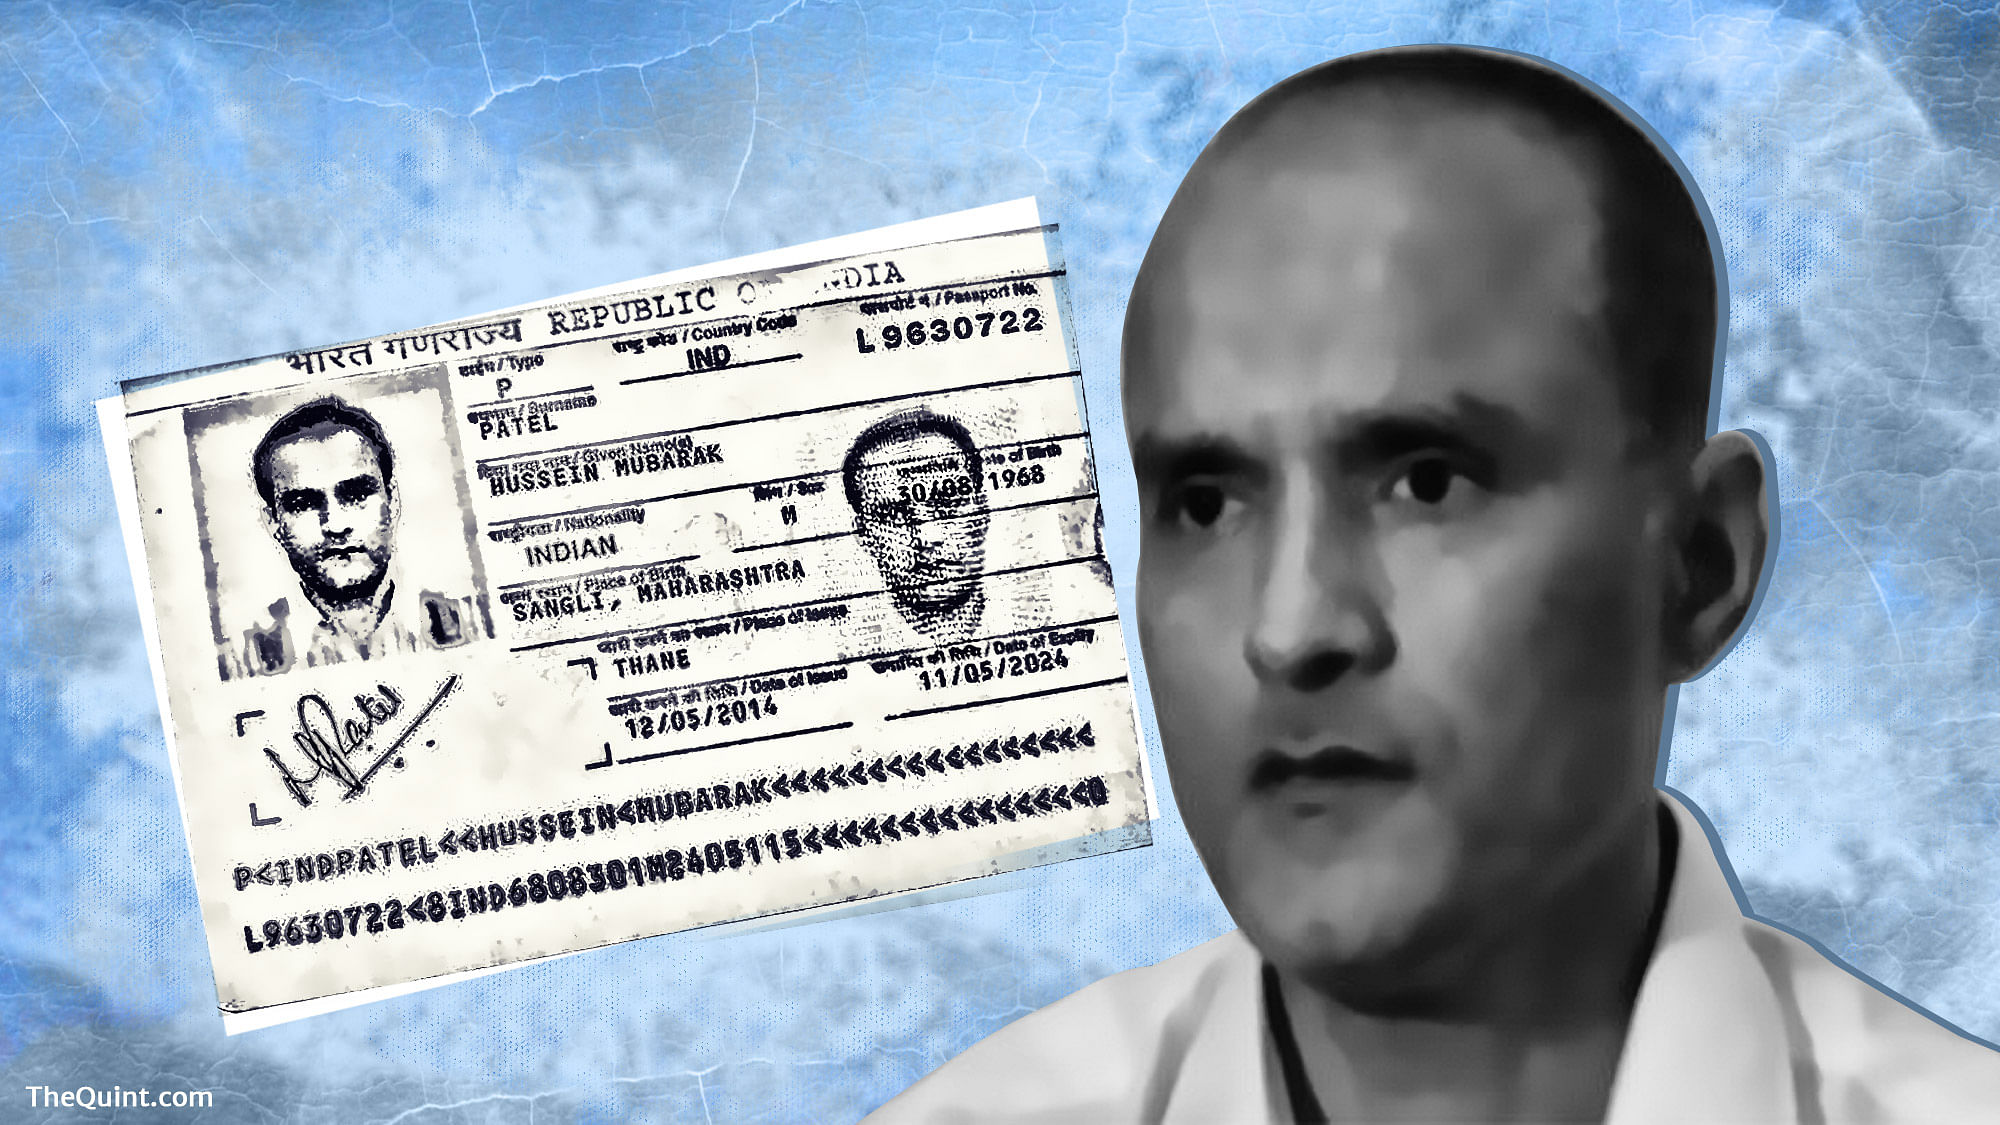 Kulbhushan Jadhav, who Islamabad claimed is an Indian spy, met his family on 25 December 2017.